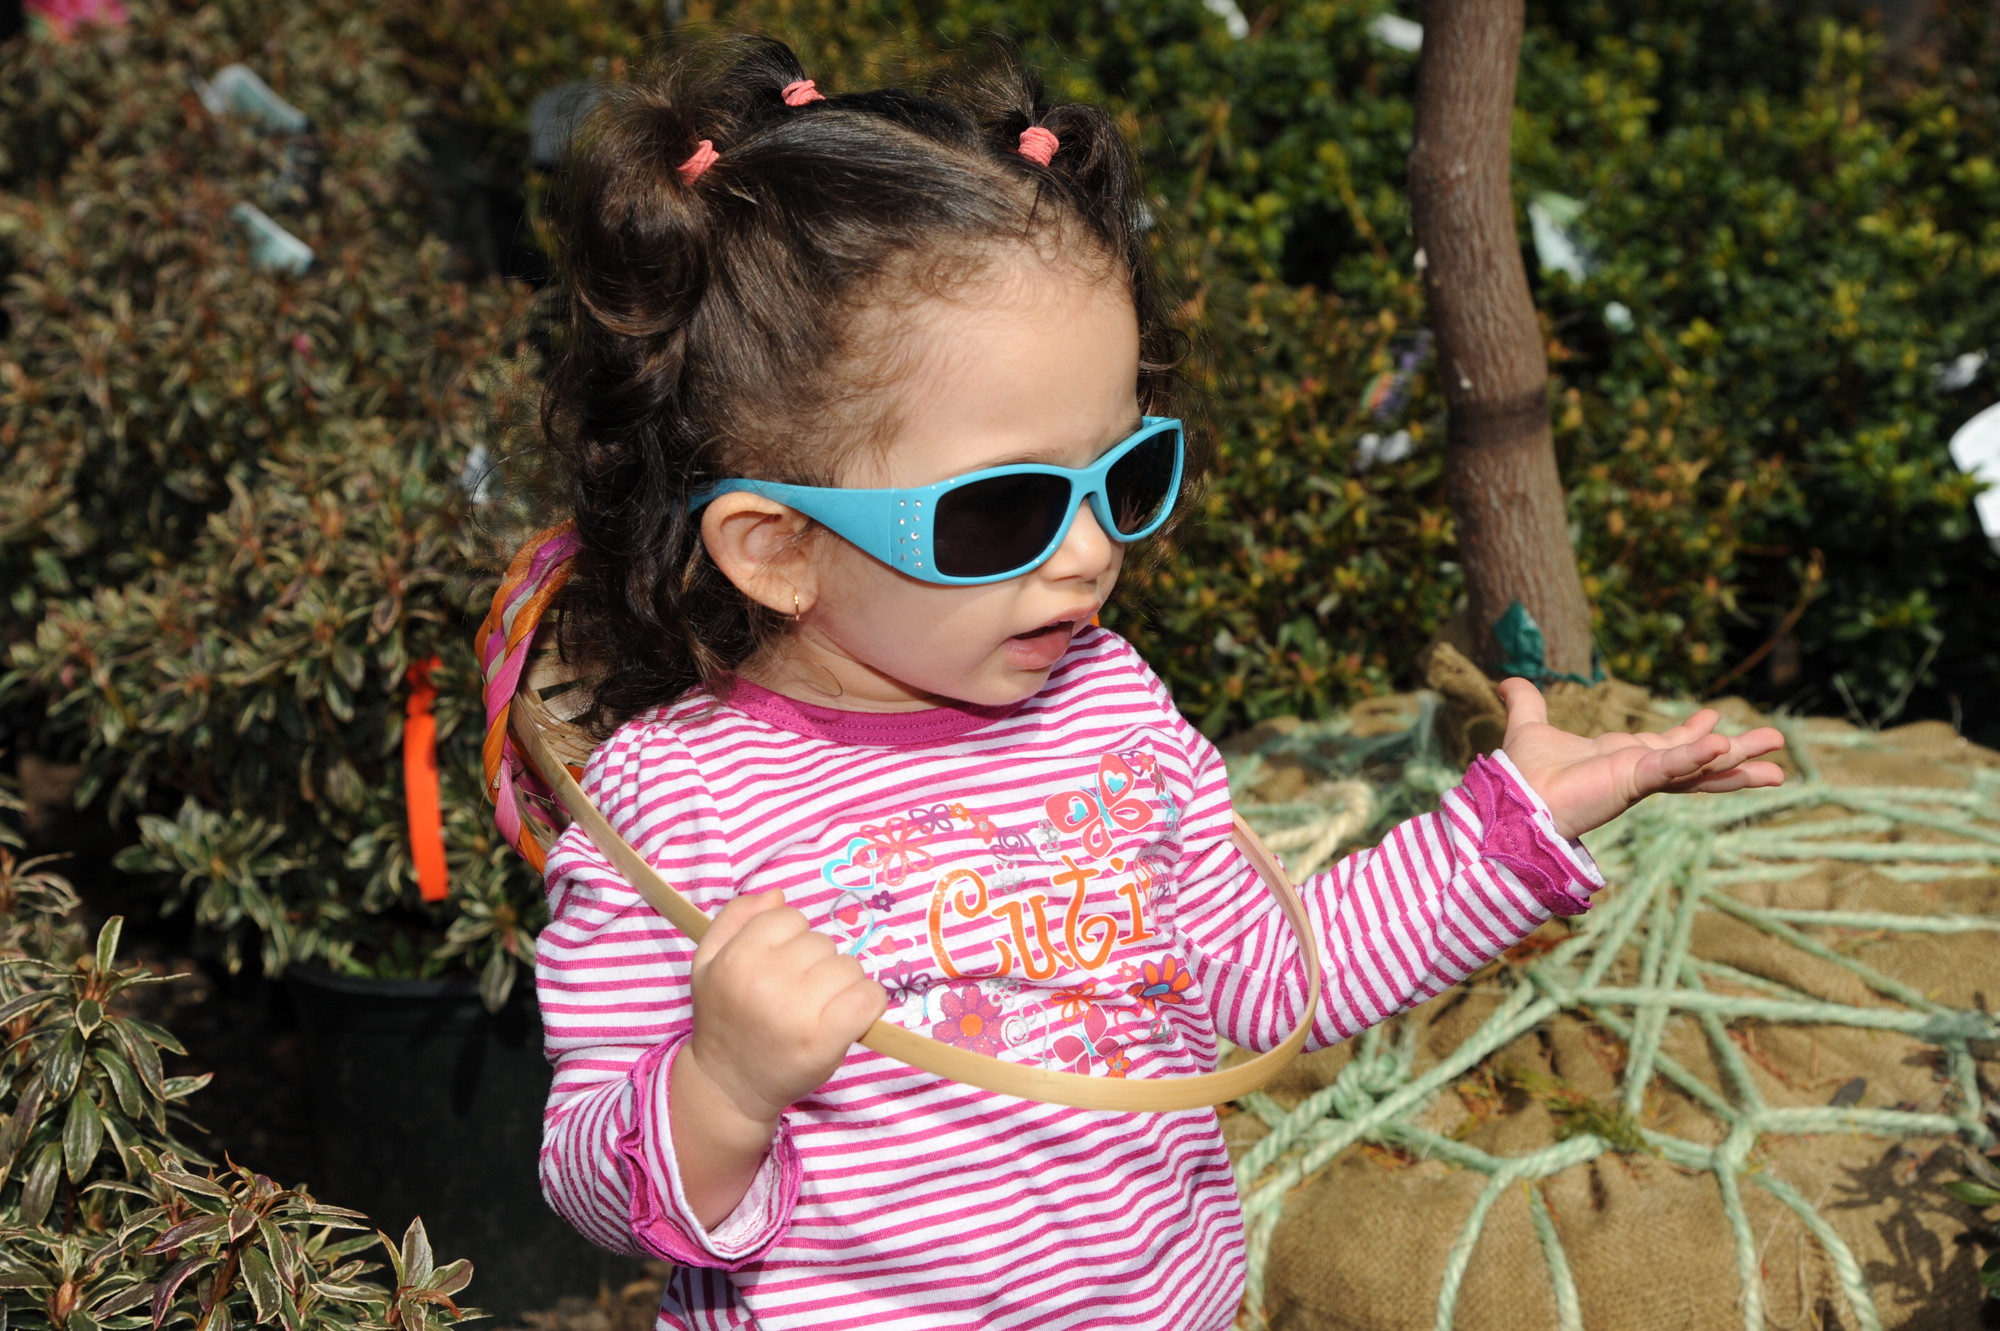 Sophia Patris, 2, hoped her sunglasses would help her locate more Easter eggs.